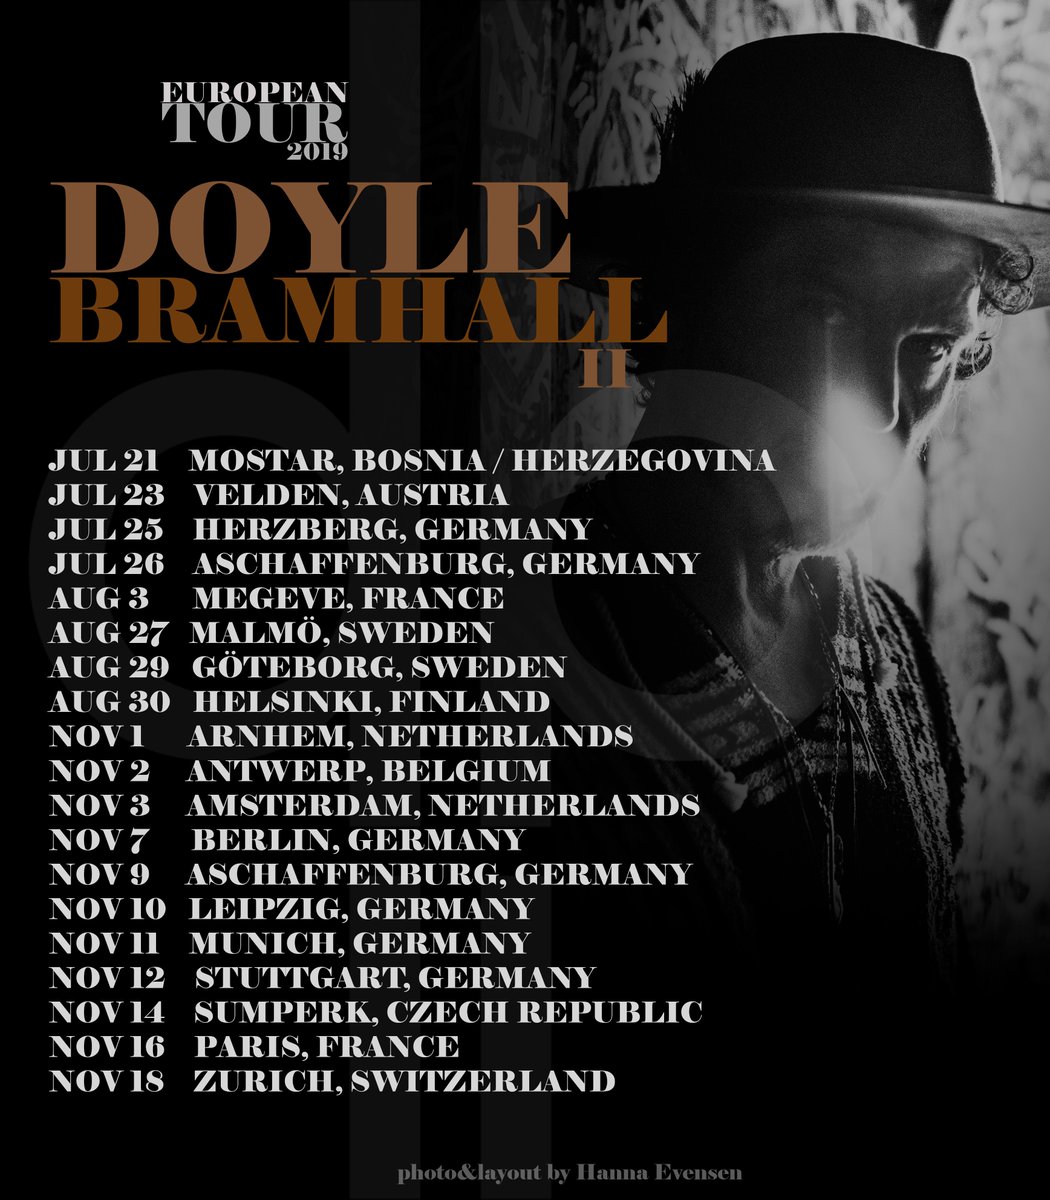 [DBII LIVE]. more tour dates added to the second leg of this tour..... details, tickets TBA soon! visit db2music.com